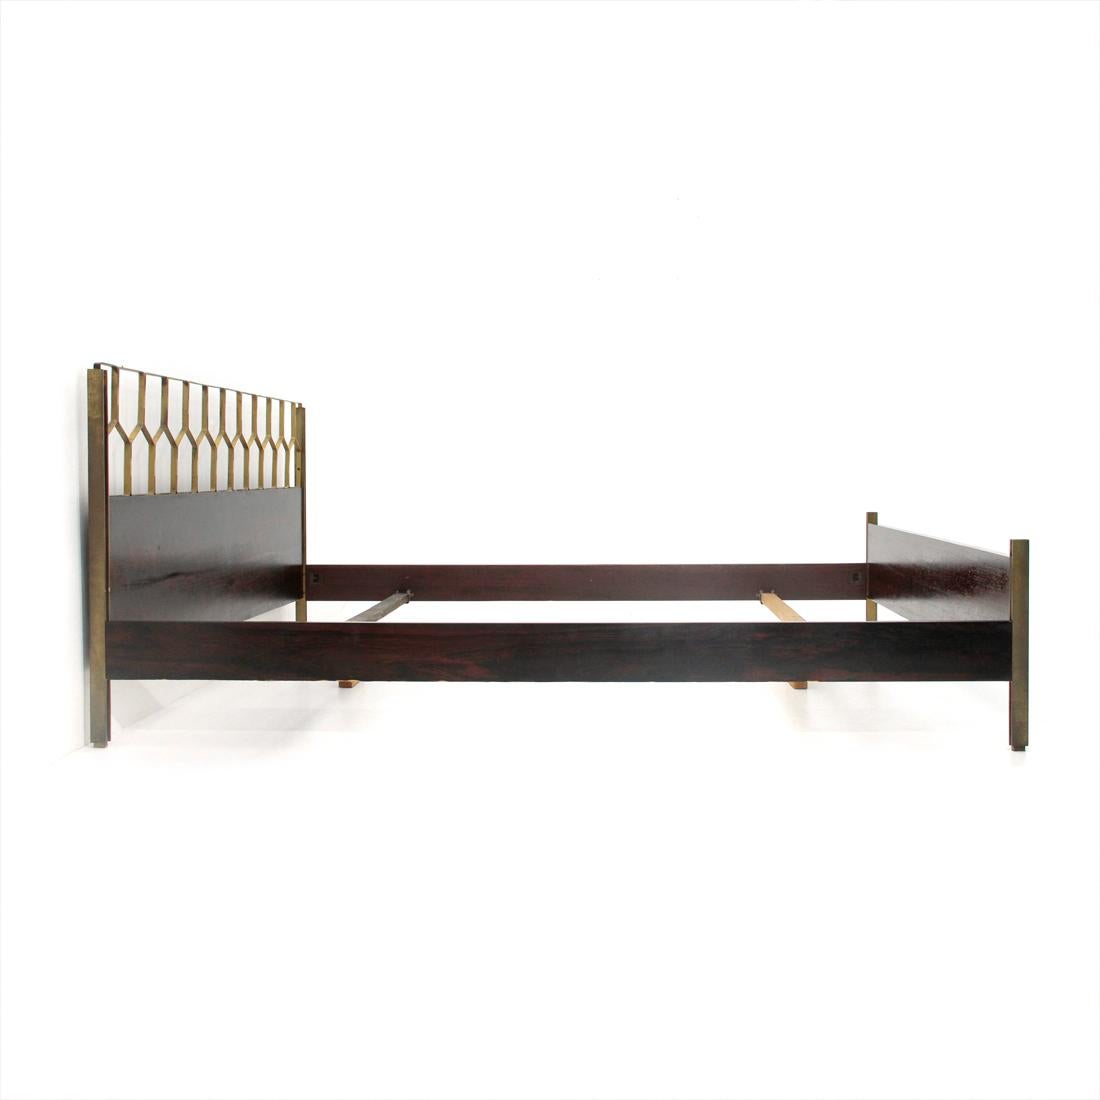 Mid-Century Modern Italian Midcentury Brass Bed by Gianni Songia for Sormani, 1960s